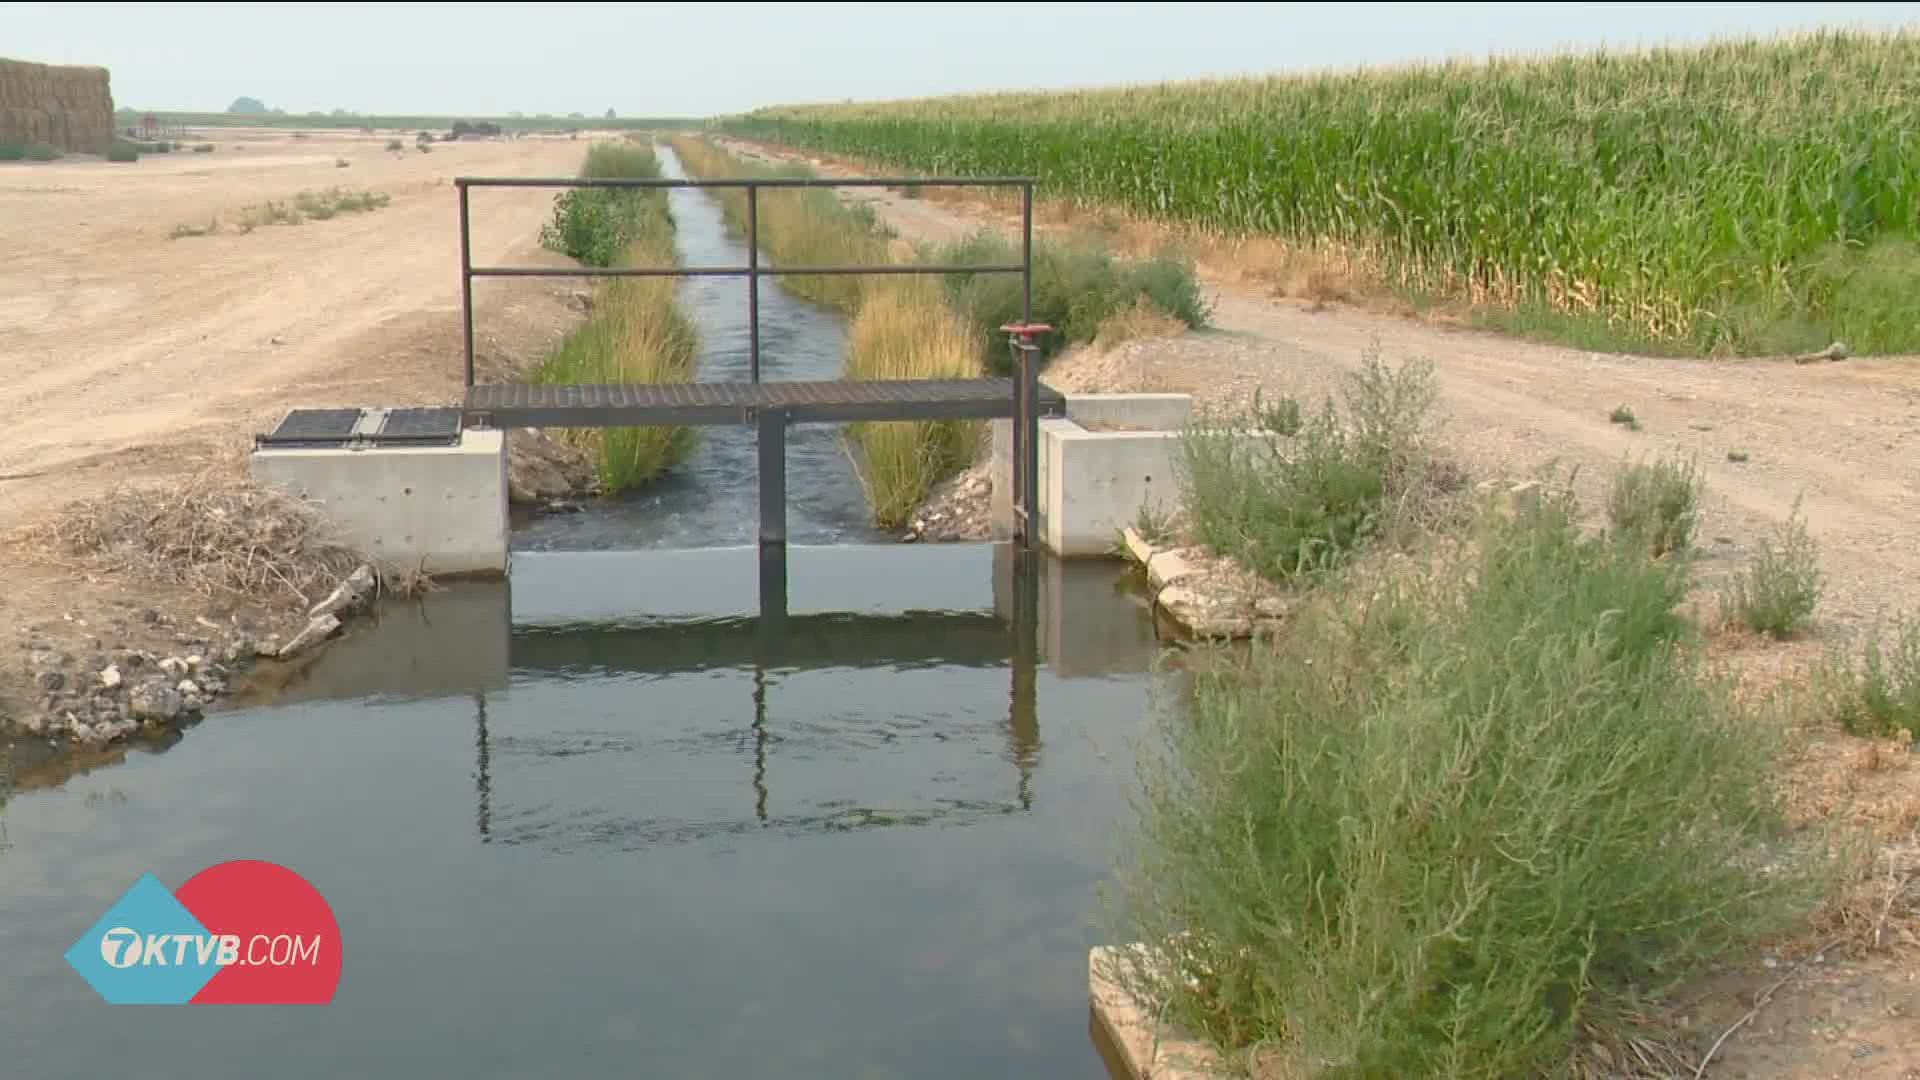 The Nampa & Meridian Irrigation District's irrigation season begins at 2 a.m. April 14. Water will begin flowing into the Ridenbaugh Canal for homes and farms.